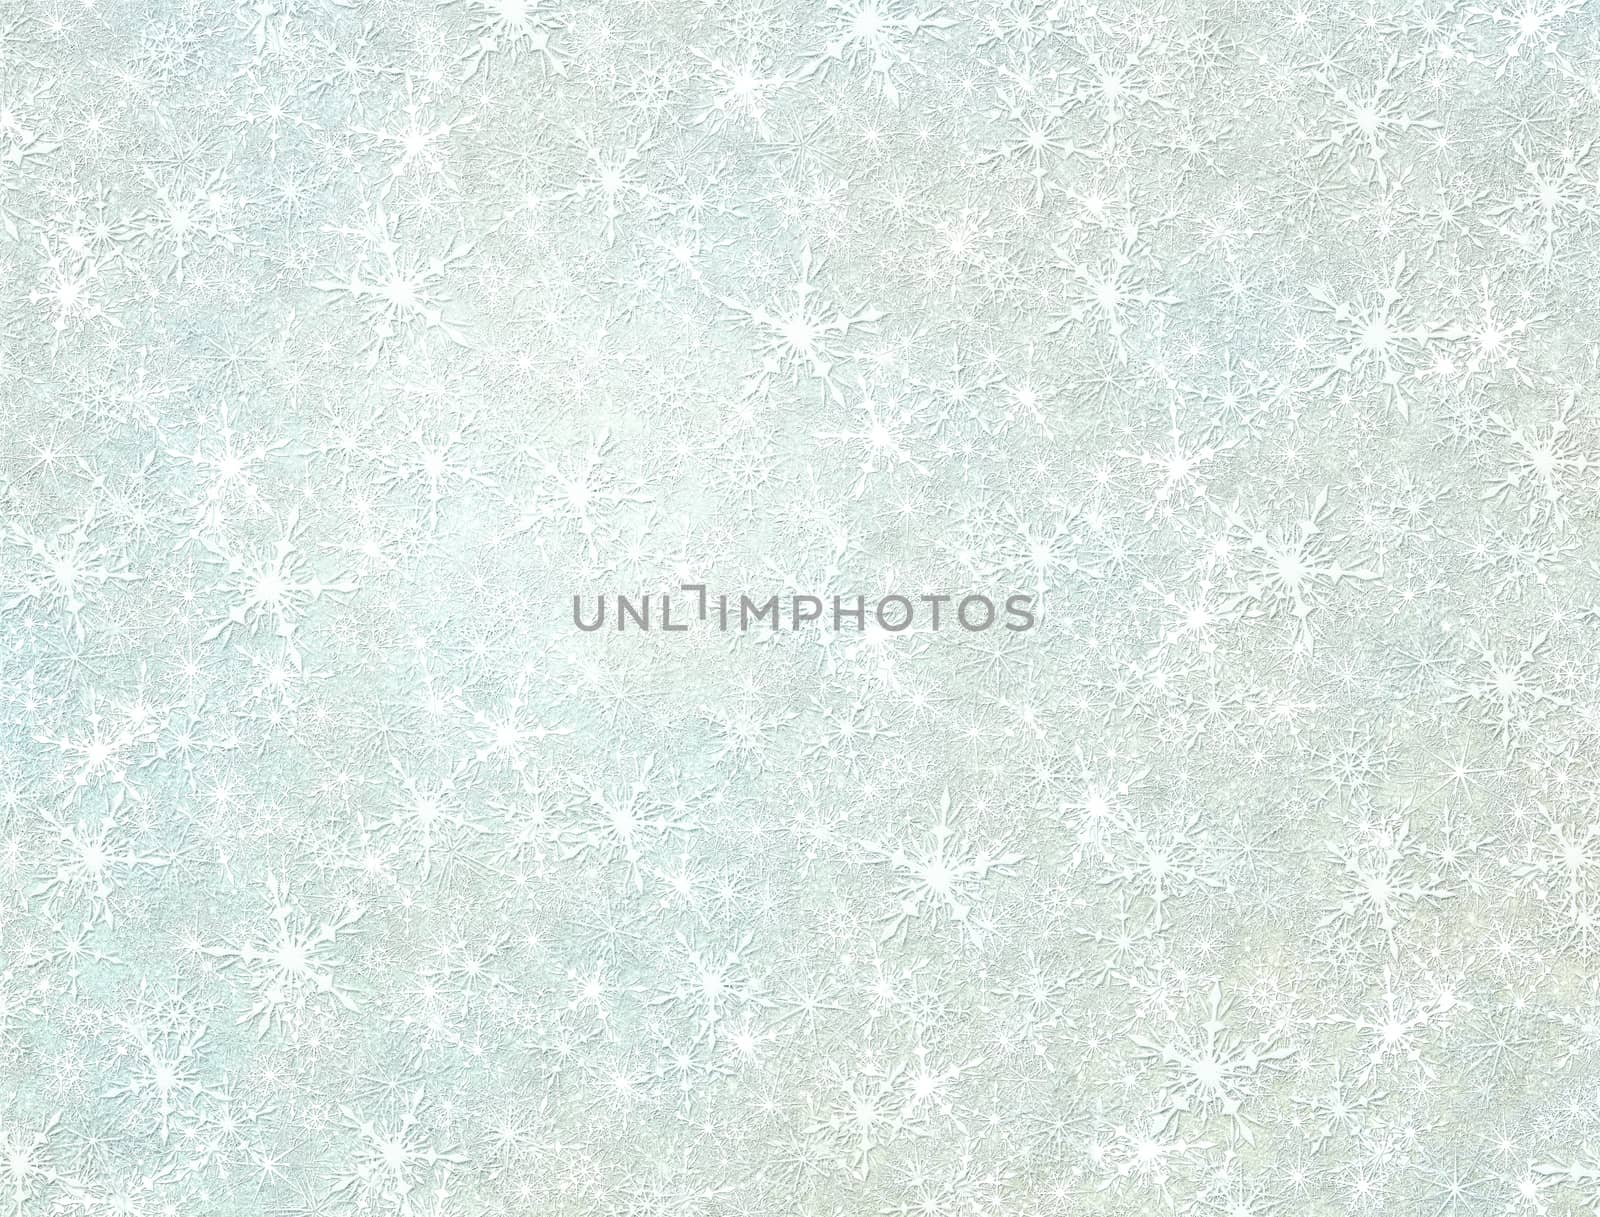 Digital illustration of hundreds of snow flakes filling the entire image with tan and light blue tinting.